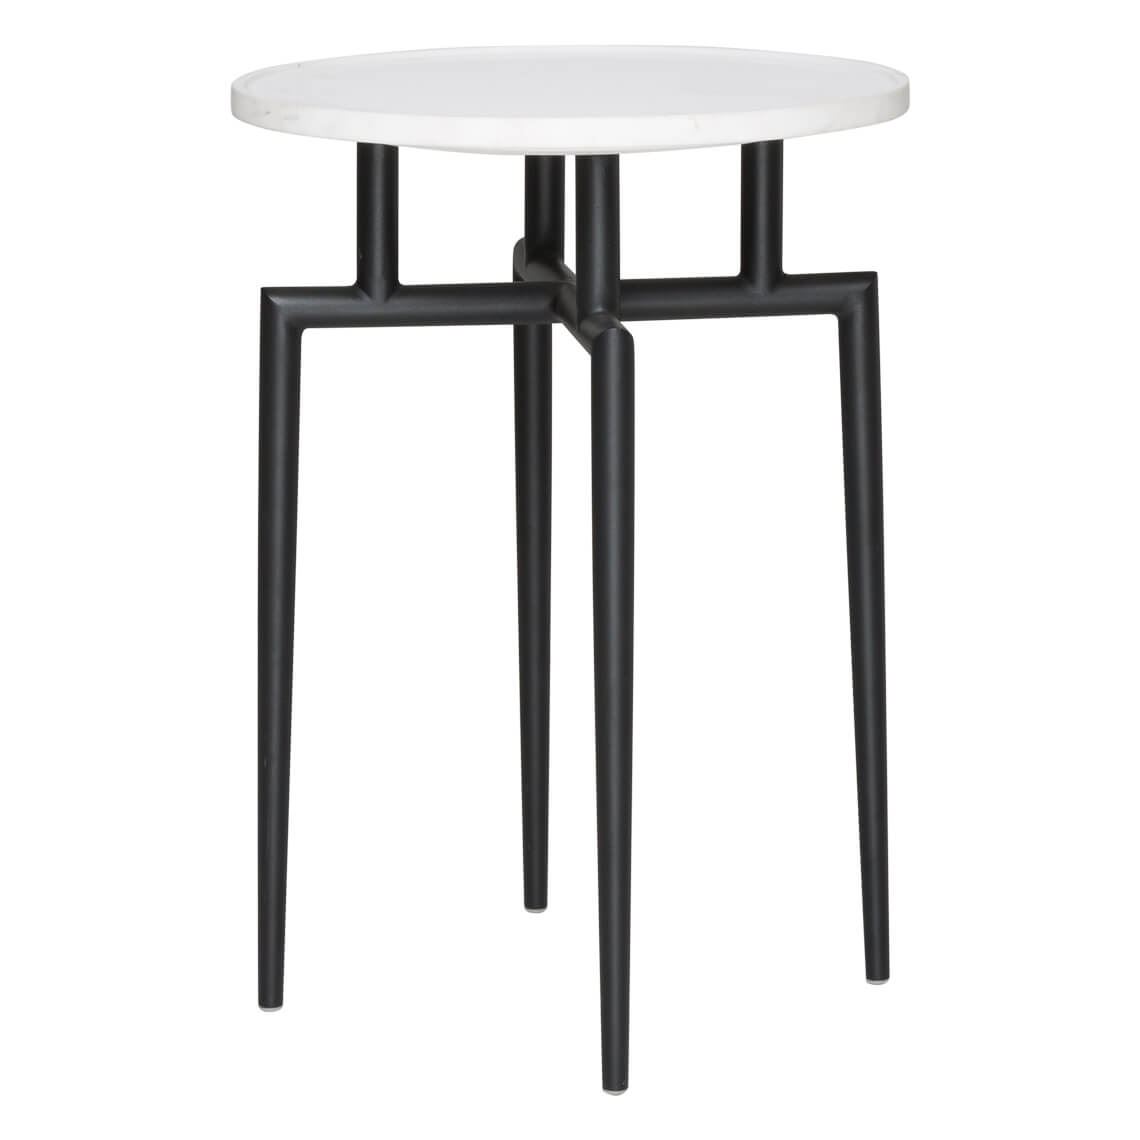 stiletto occasional table marble black products duke accent pottery barn stratford wicker folding bronze mirror with brown lamps outdoor coffee ice bucket small oak lamp diy round